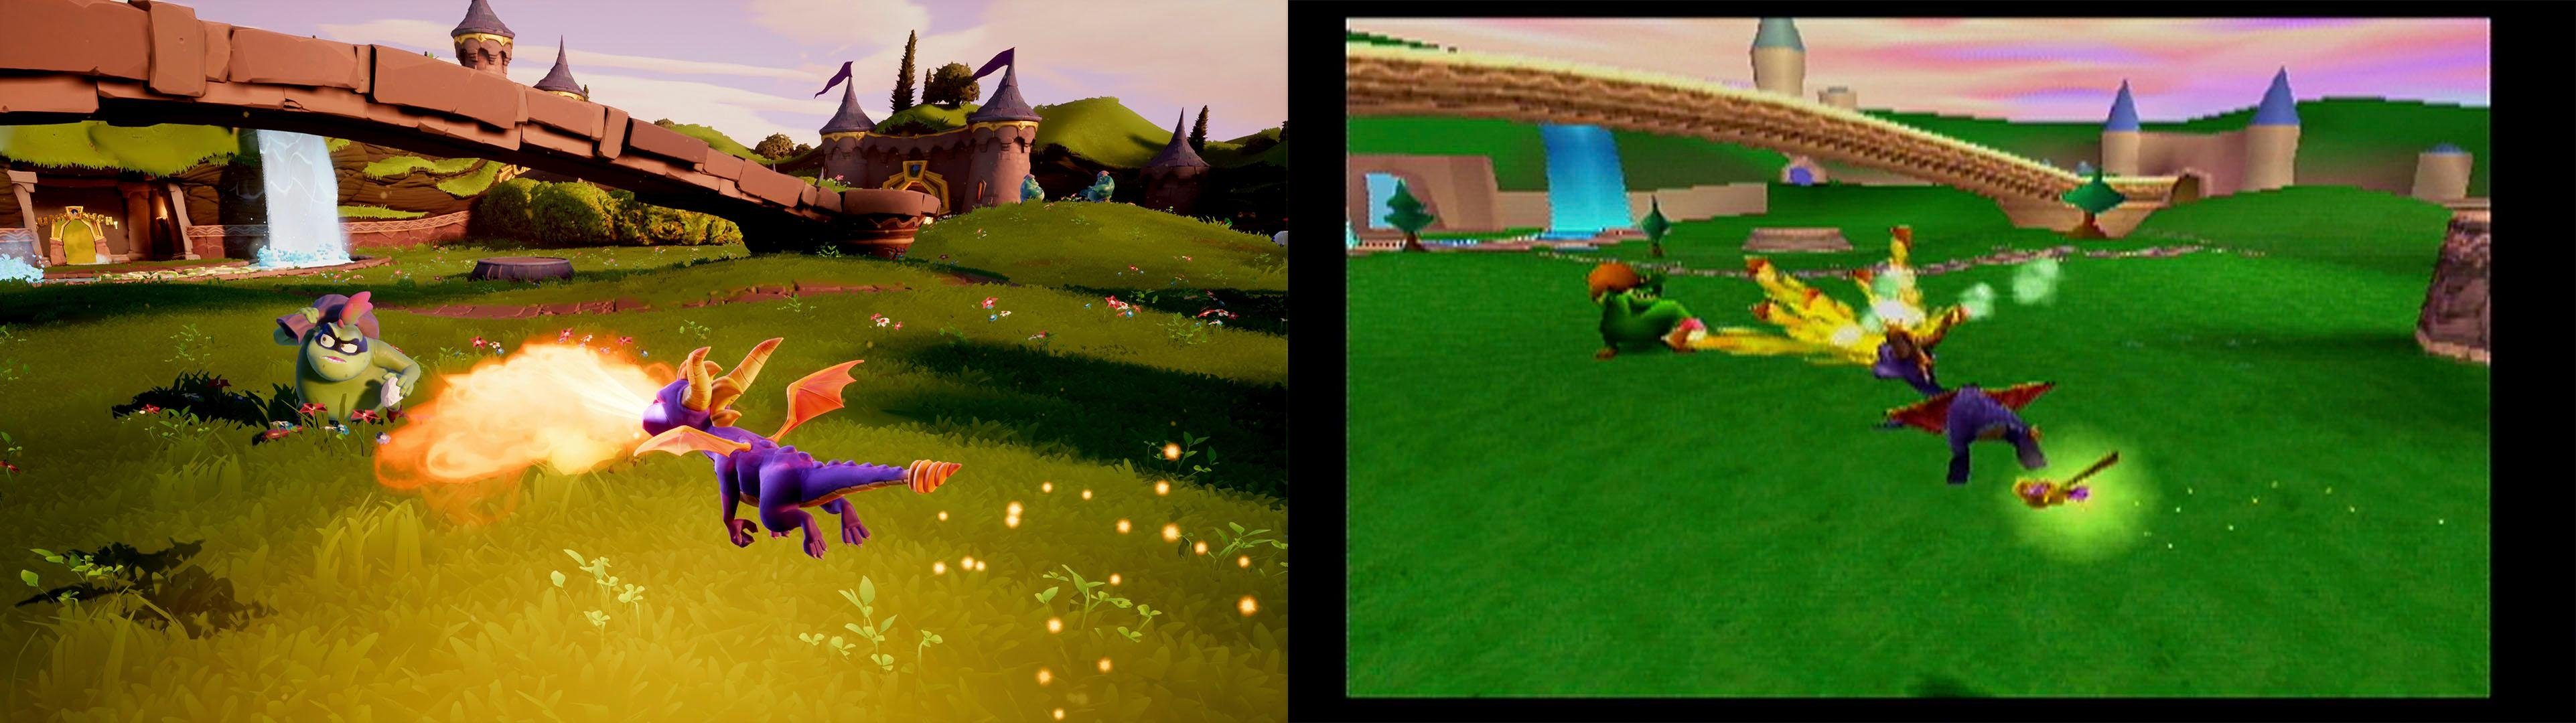 Trilogy Xbox One Spyro Reignited Activision